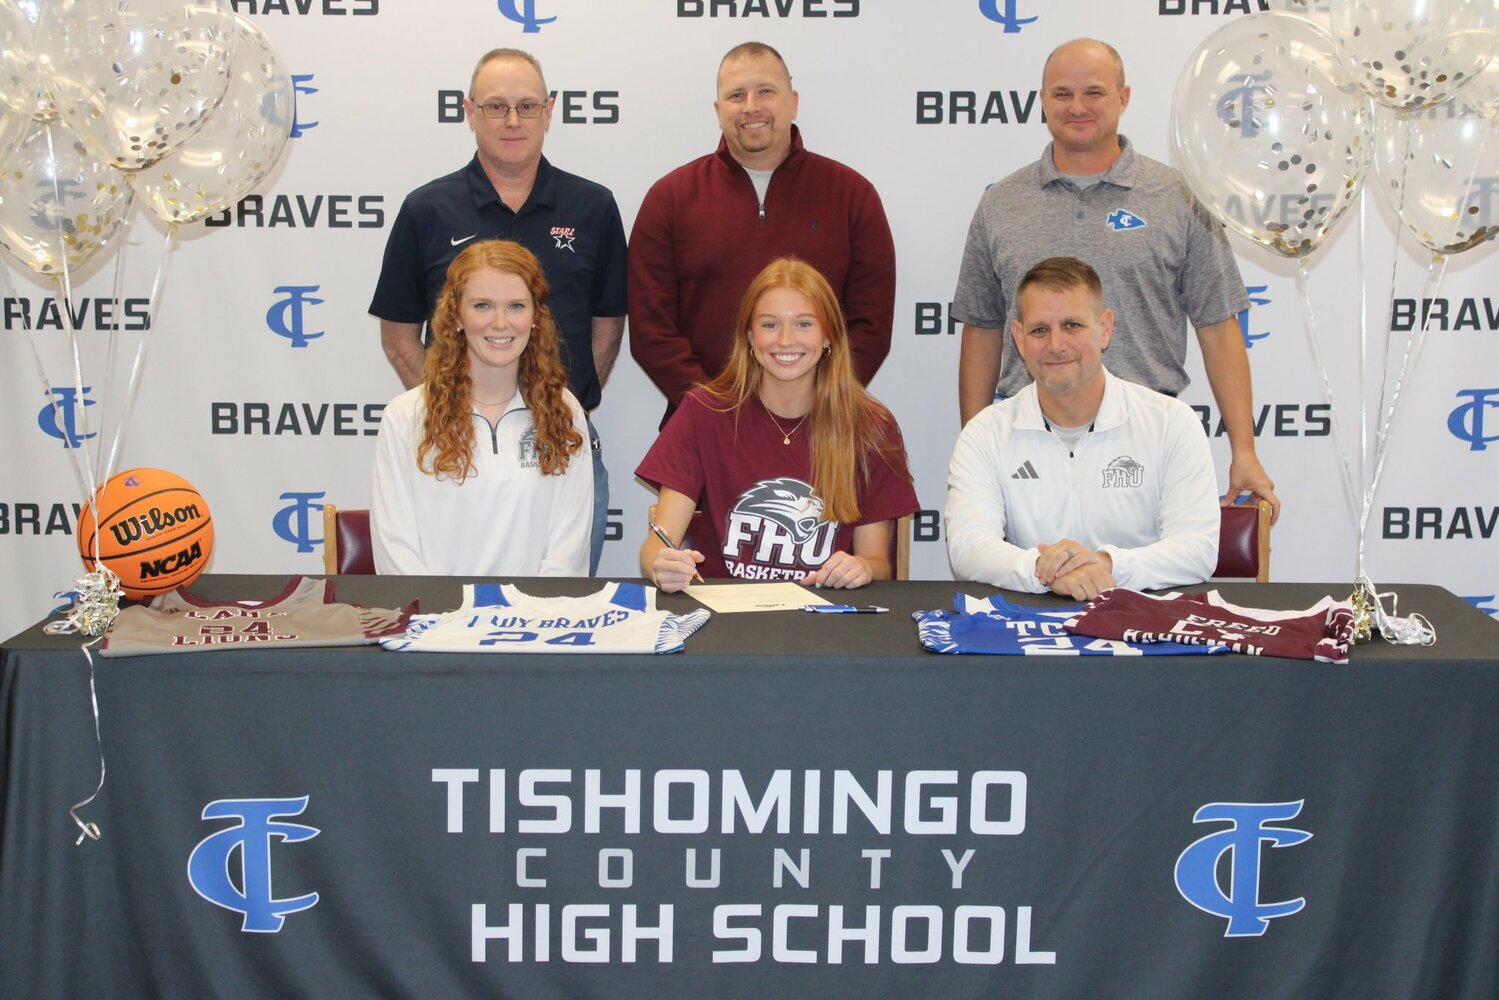 Signing with Freed-Hardeman - Reese Moore, center with Coaches Abby Stutts and Josh Epperson of Freed-Hardeman and standing is Bryon Veal, AAU Coach, and TCHS Coaches Cory Glidewell, and Brian Middleton.